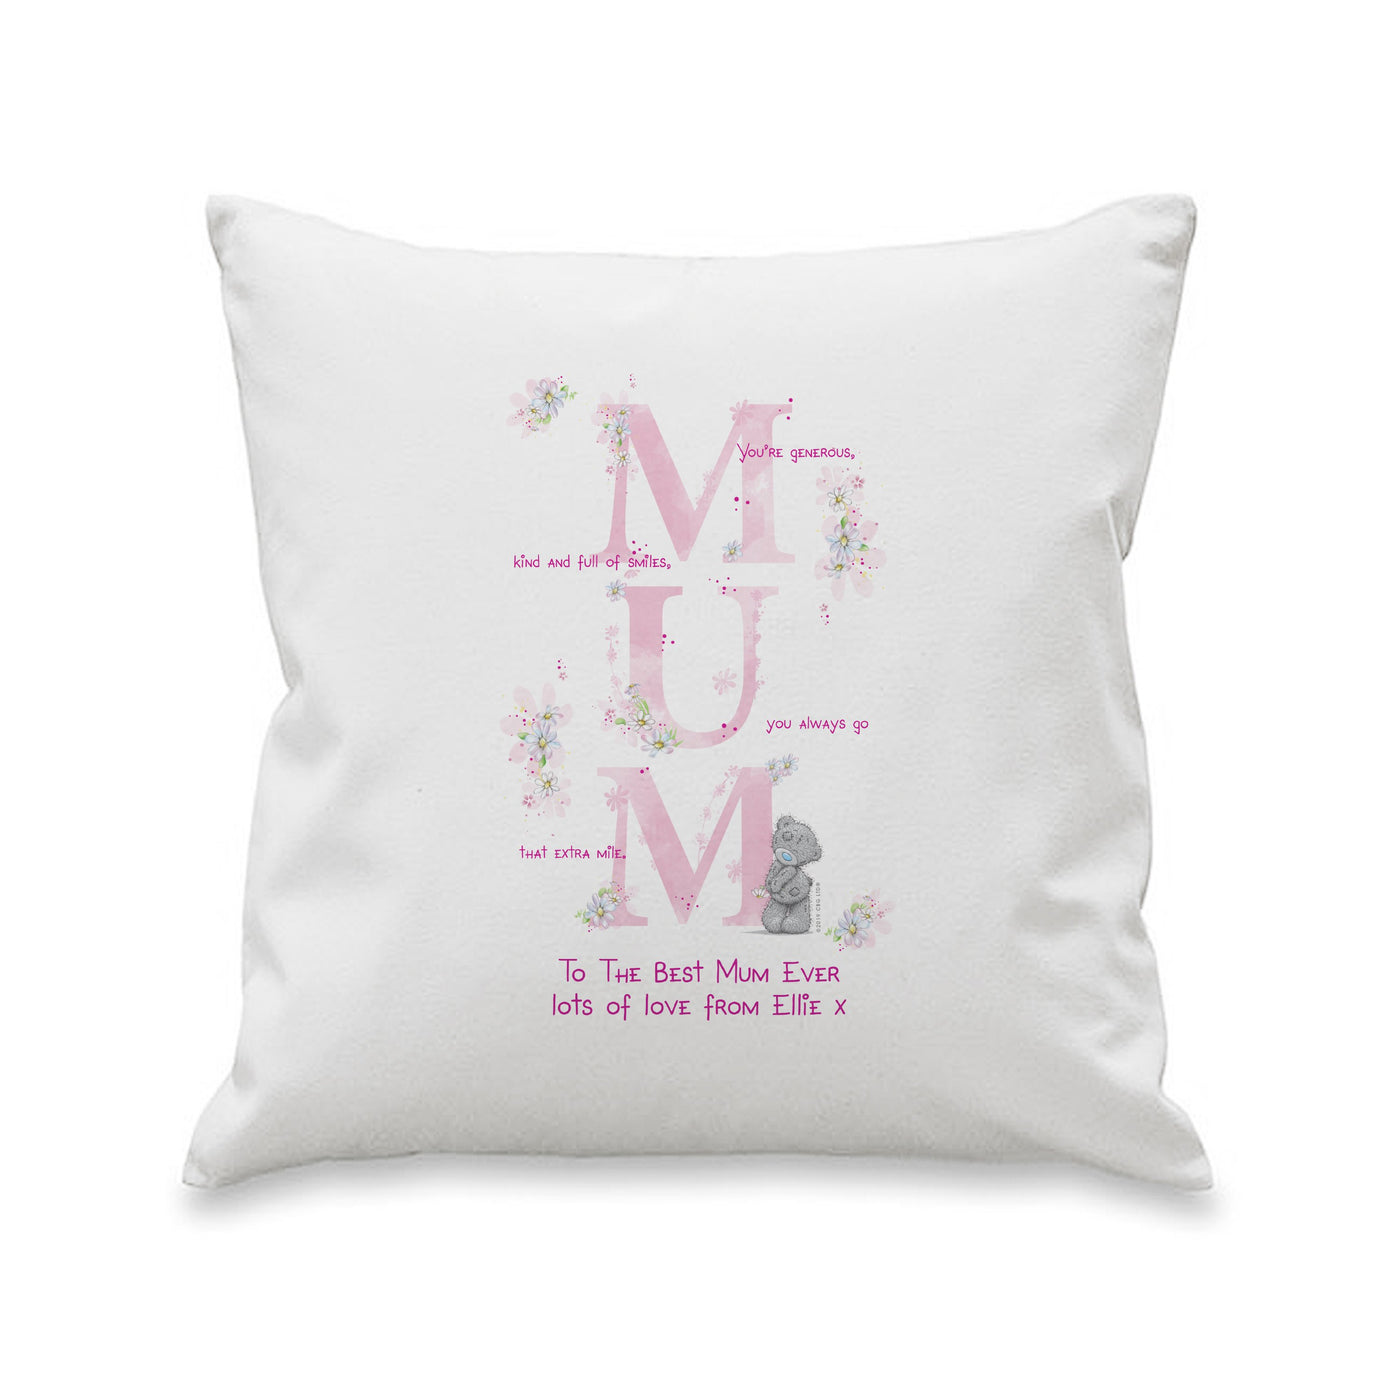 Personalised Me To You MUM Filled Cushion - Shop Personalised Gifts